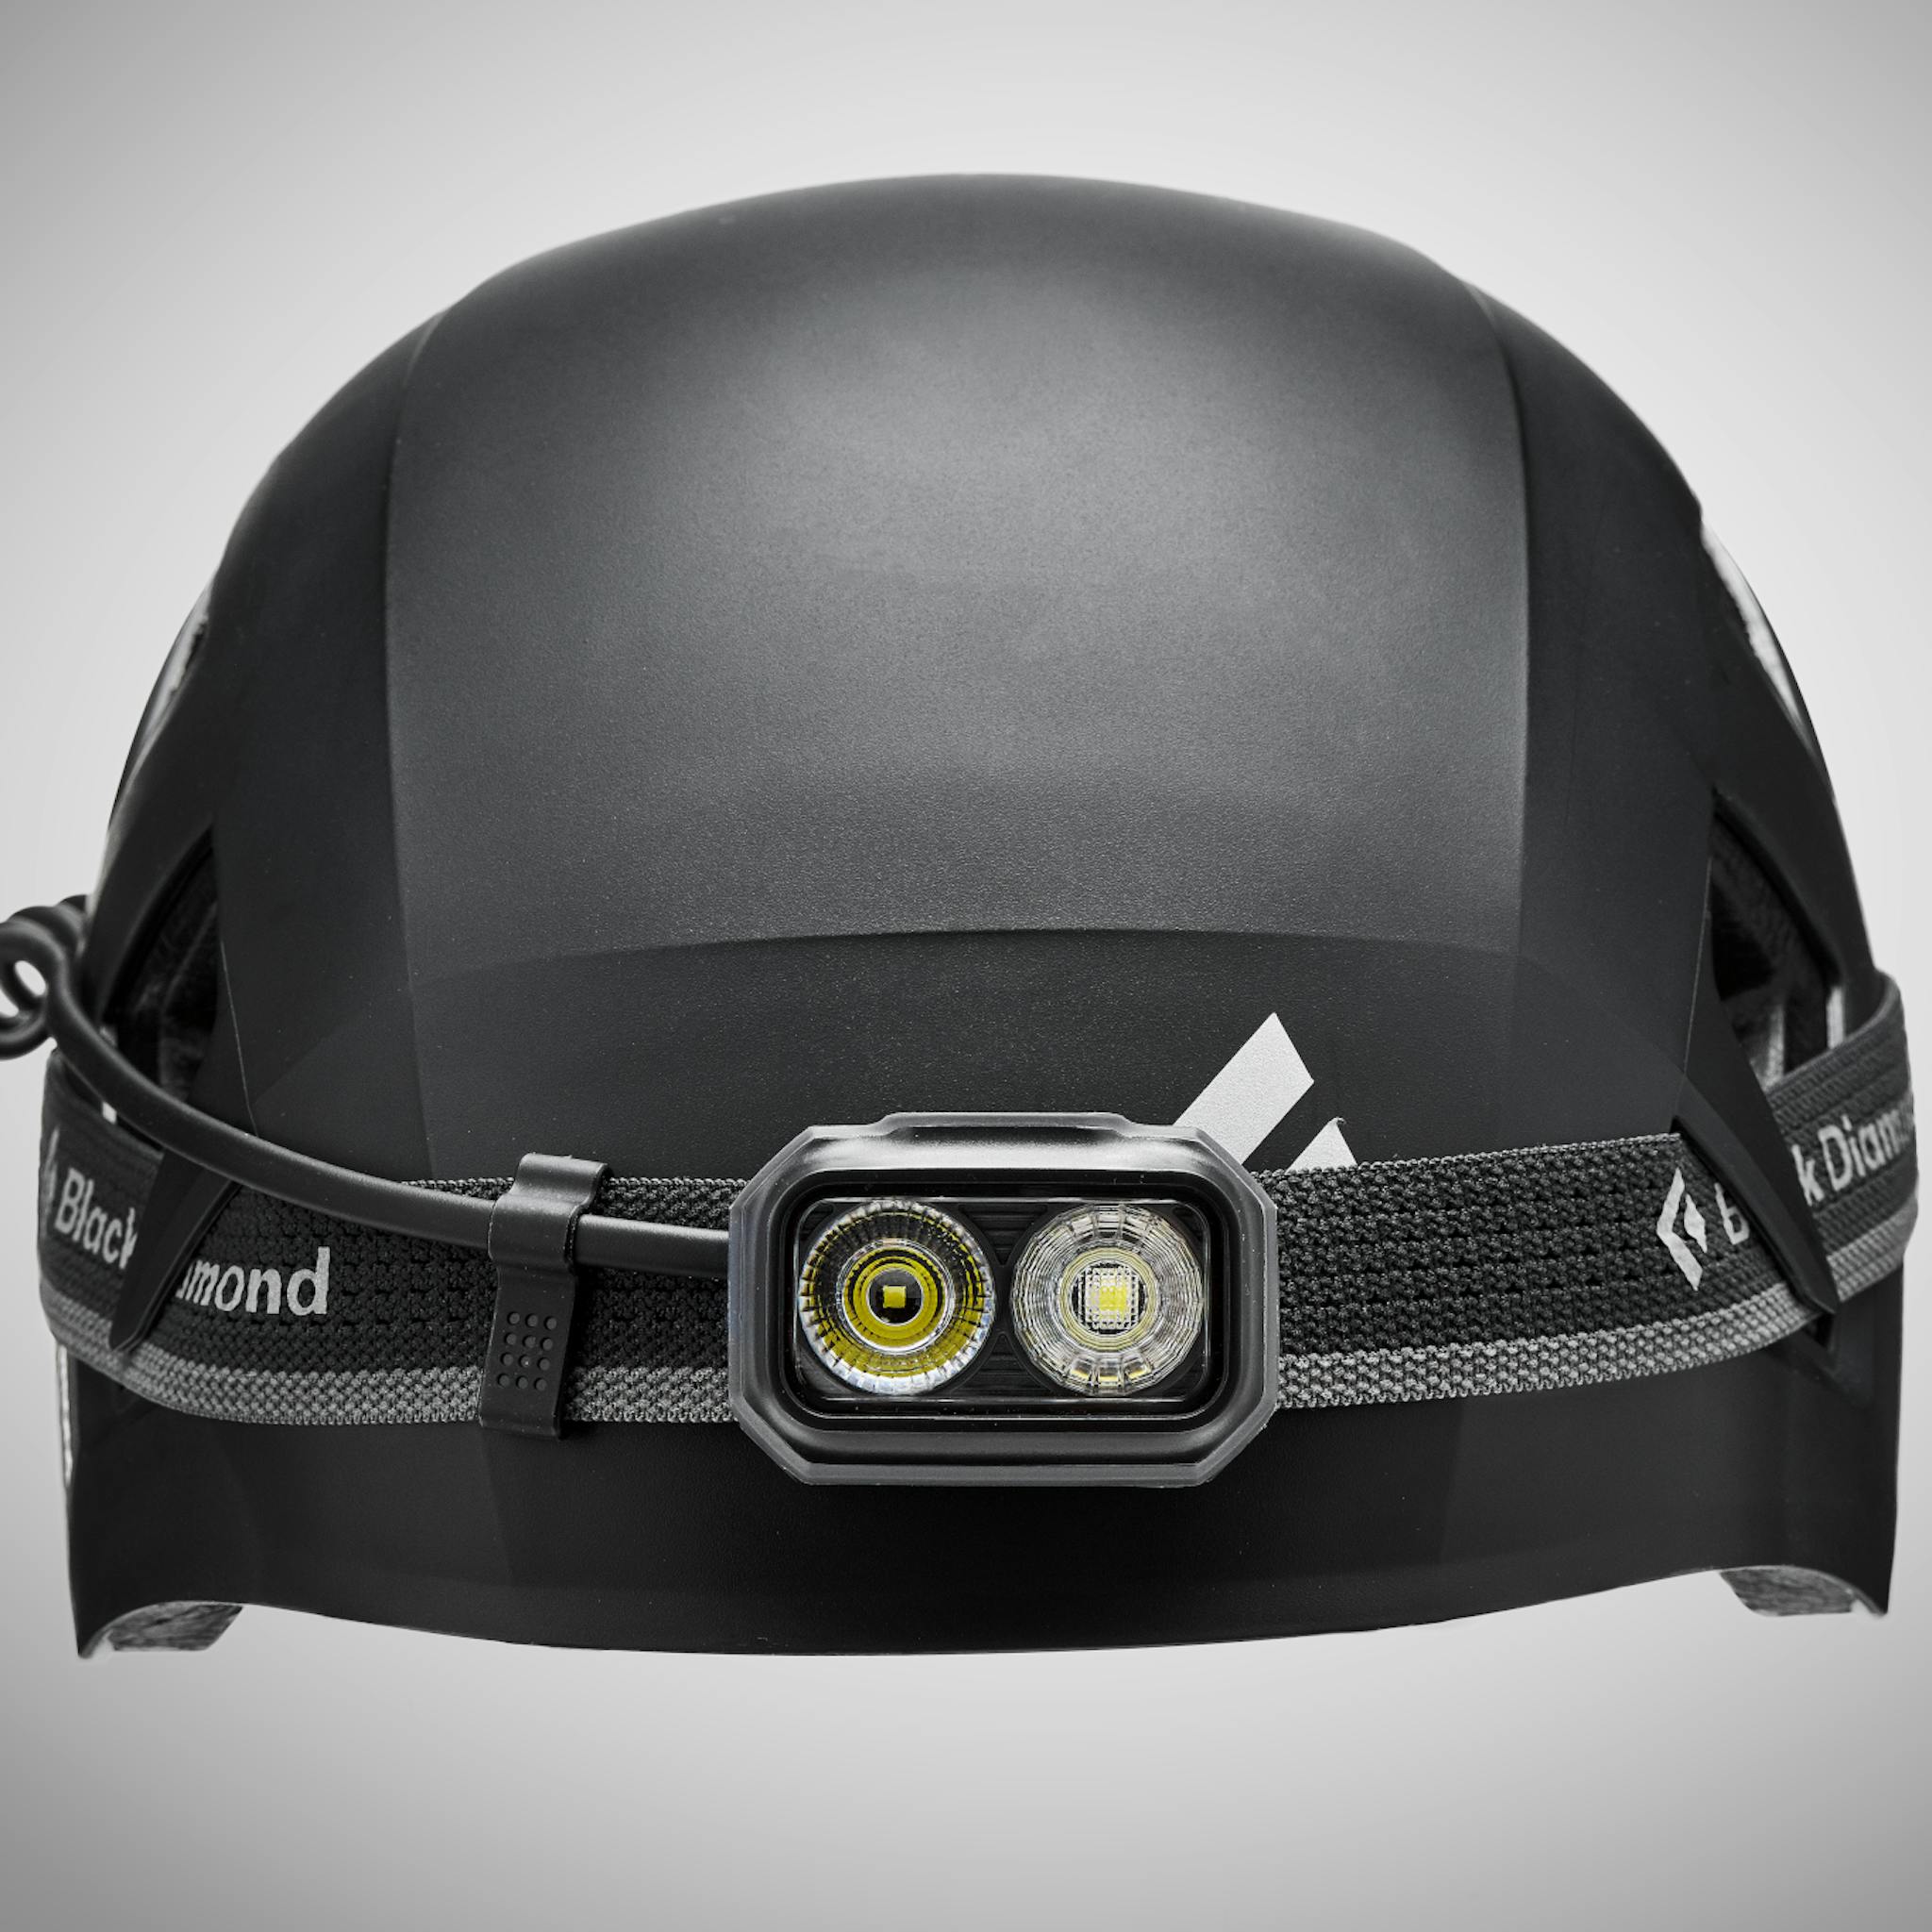 A front view of the Capitan MIPS with a headlamp on the helmet.